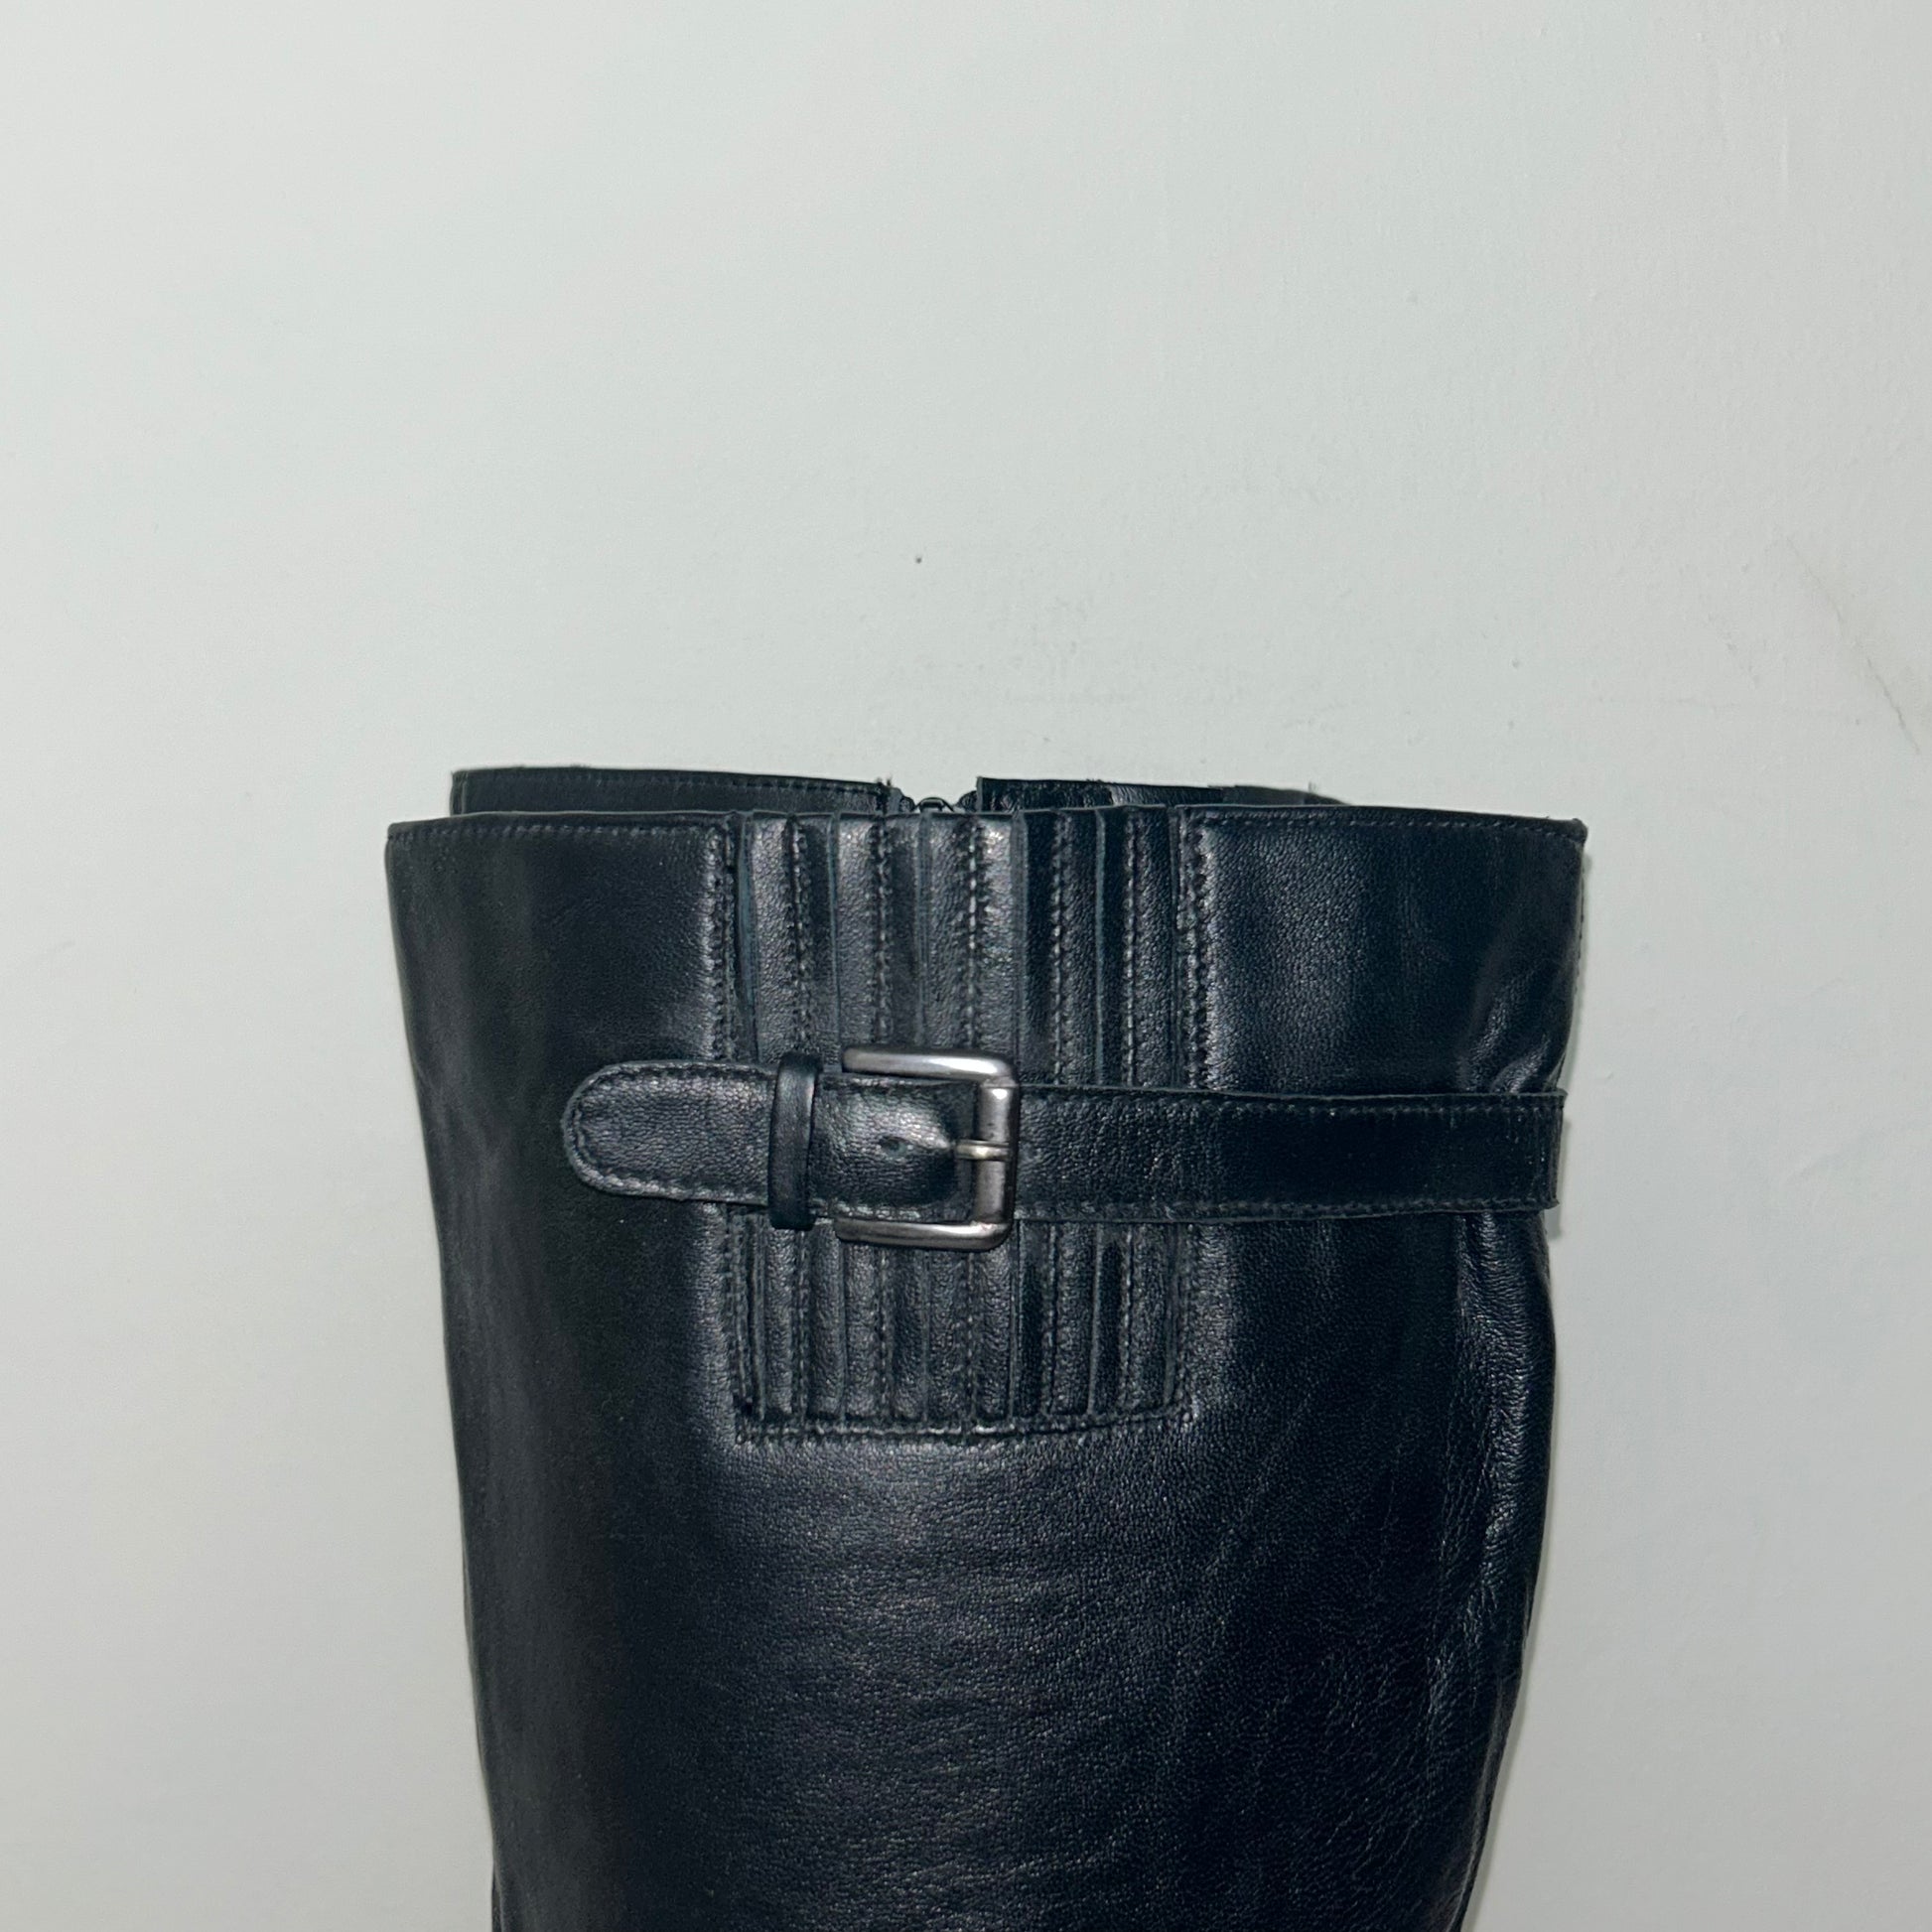 buckle of black knee high silver buckle boots shown on a white background